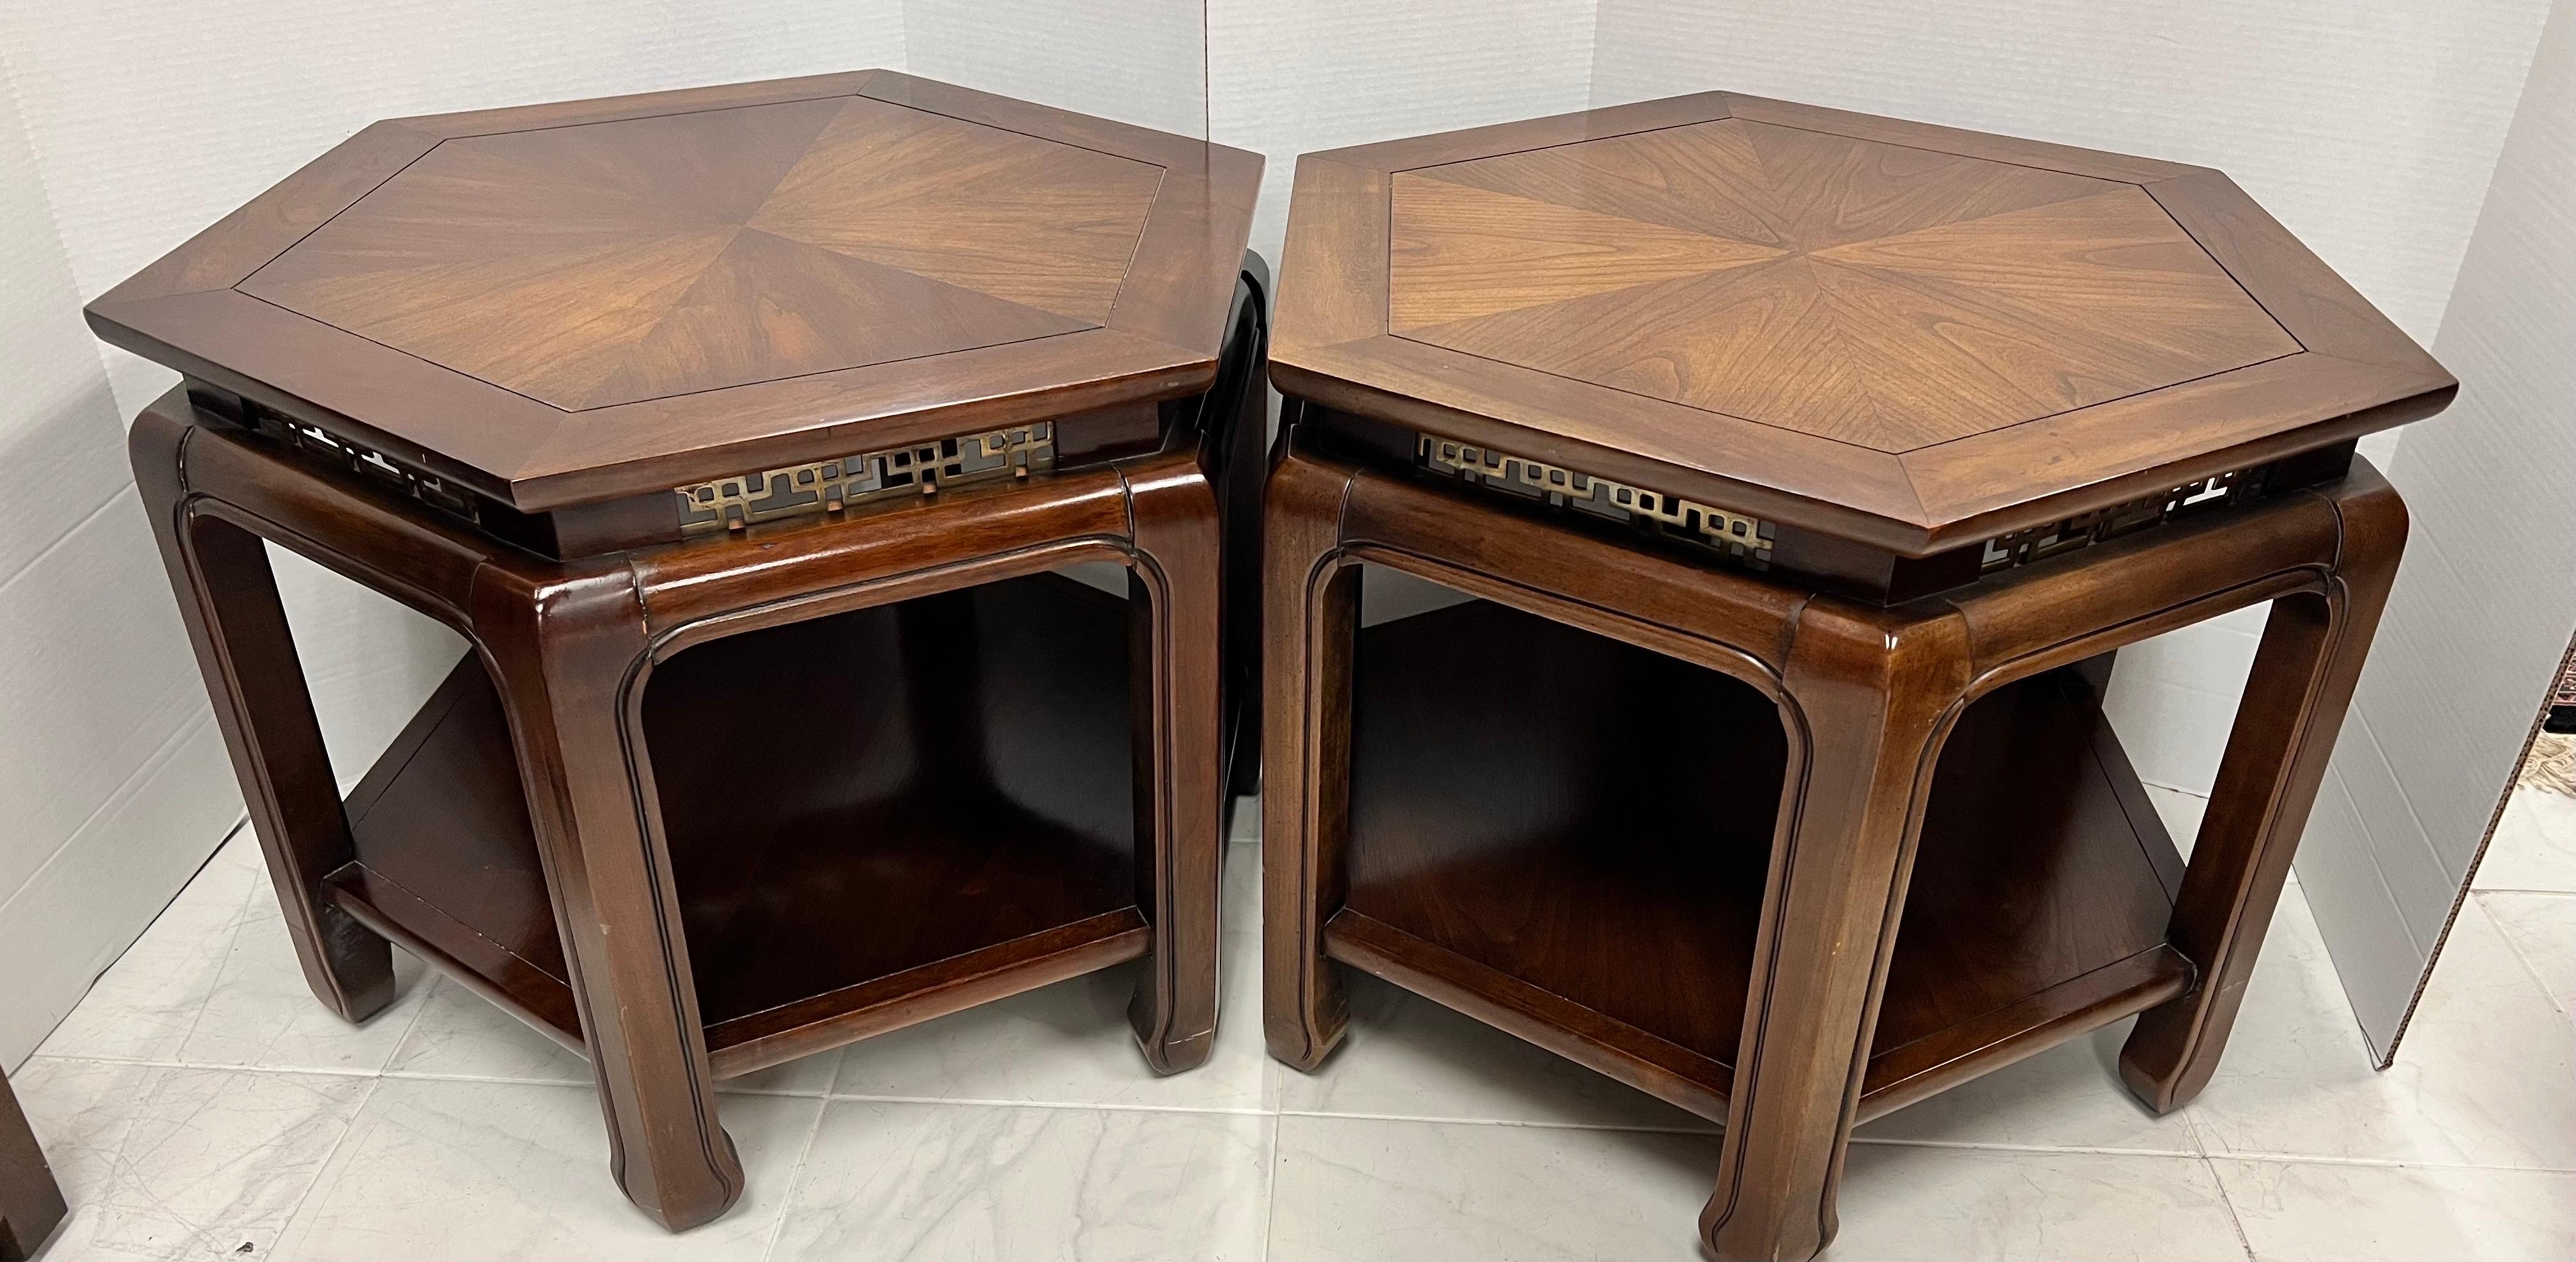 Pair of matching mid century Chinoiserie style octagonal tables with bottom shelving as well and pierced brass accents and pie crust marquetry at top.
Why not own the best?